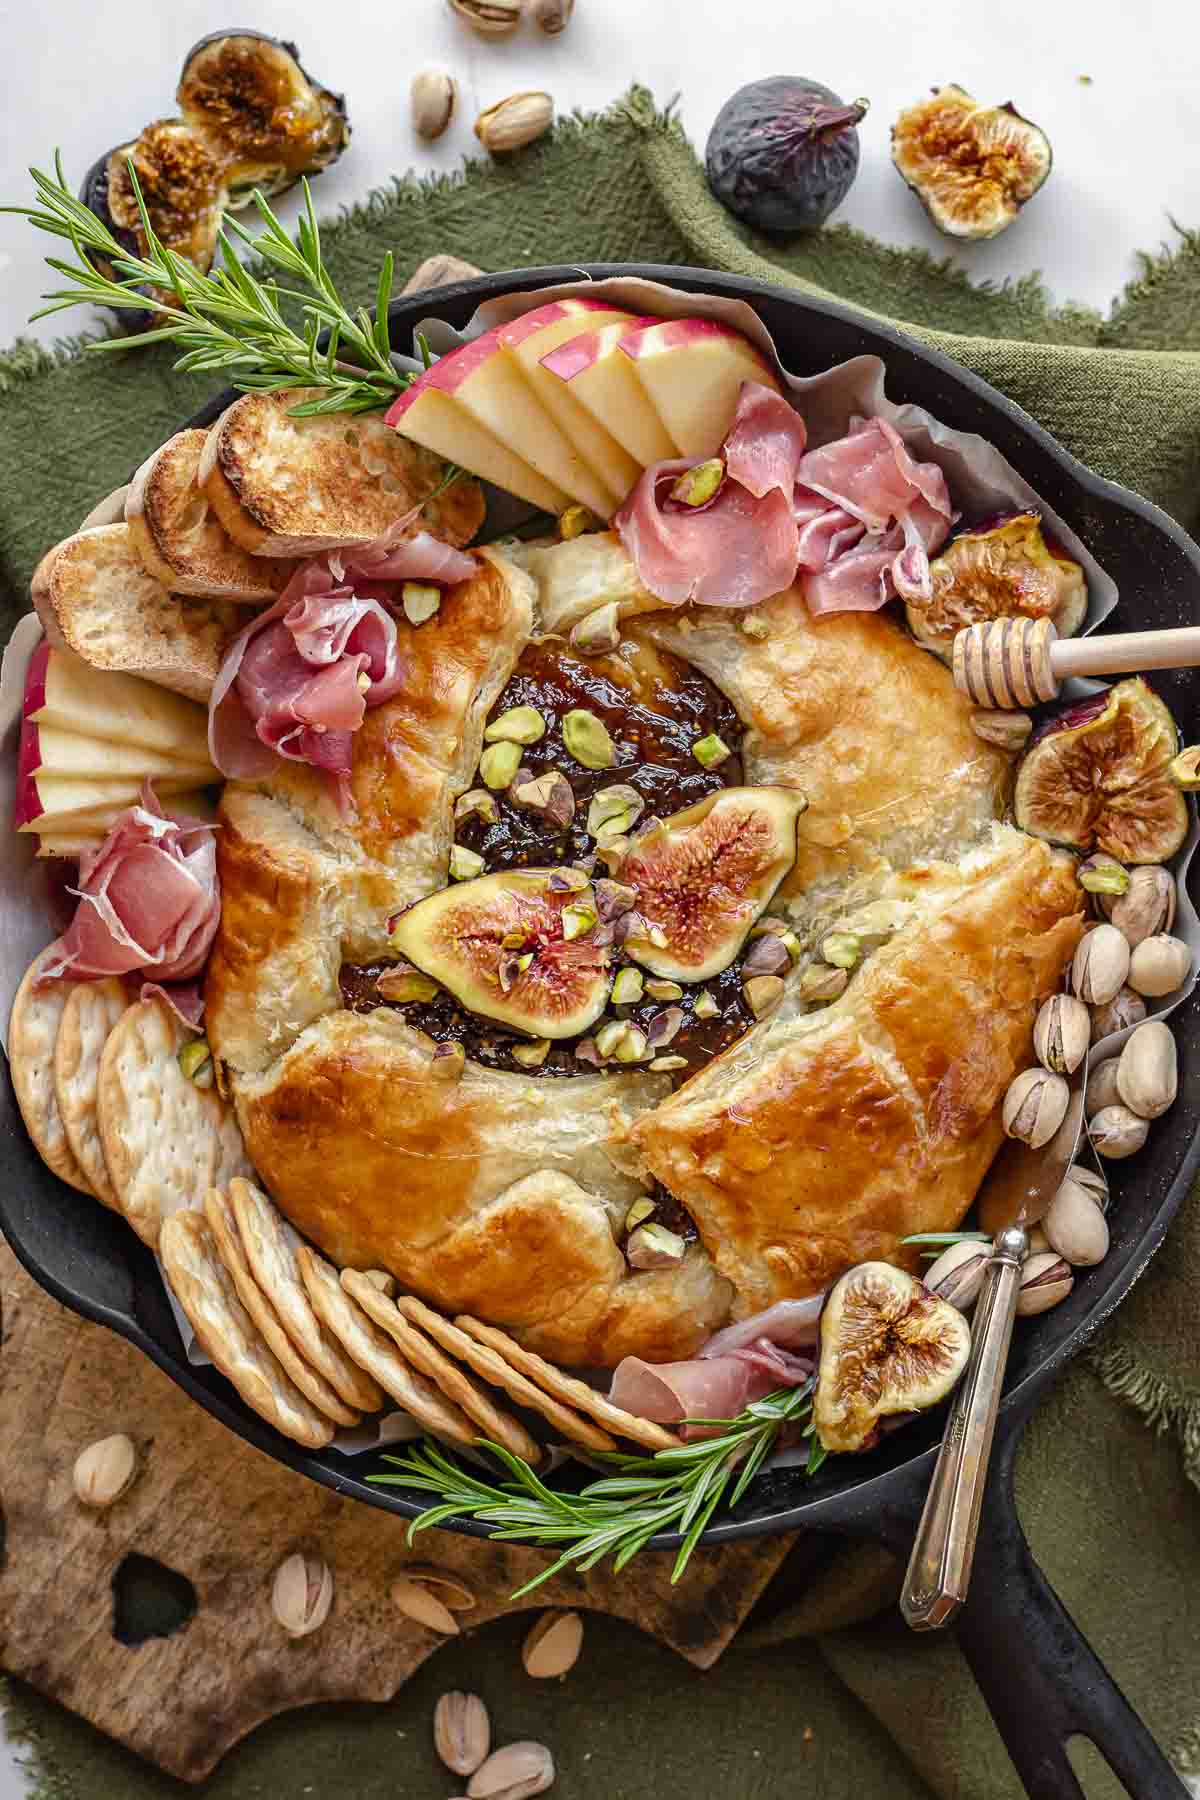 Finished baked brie in a cast iron skillet with dippers scattered around.